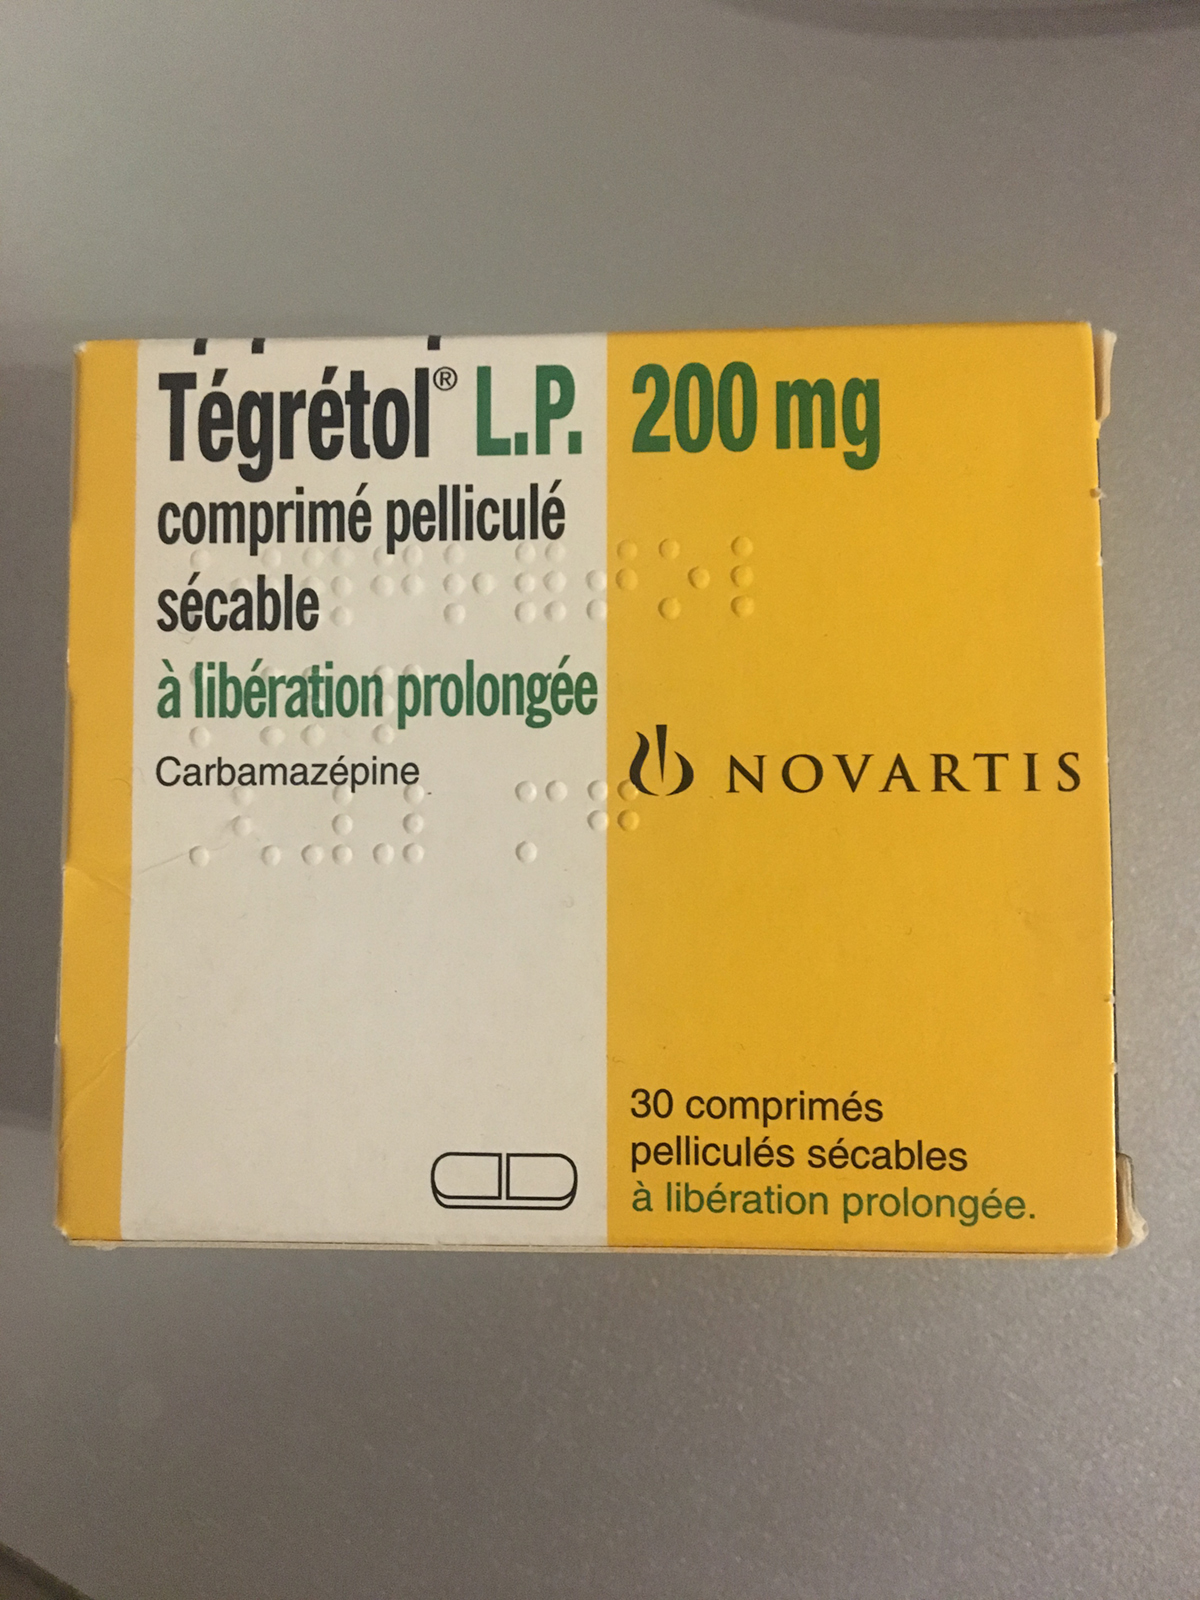 what is tegretol 200 mg used for